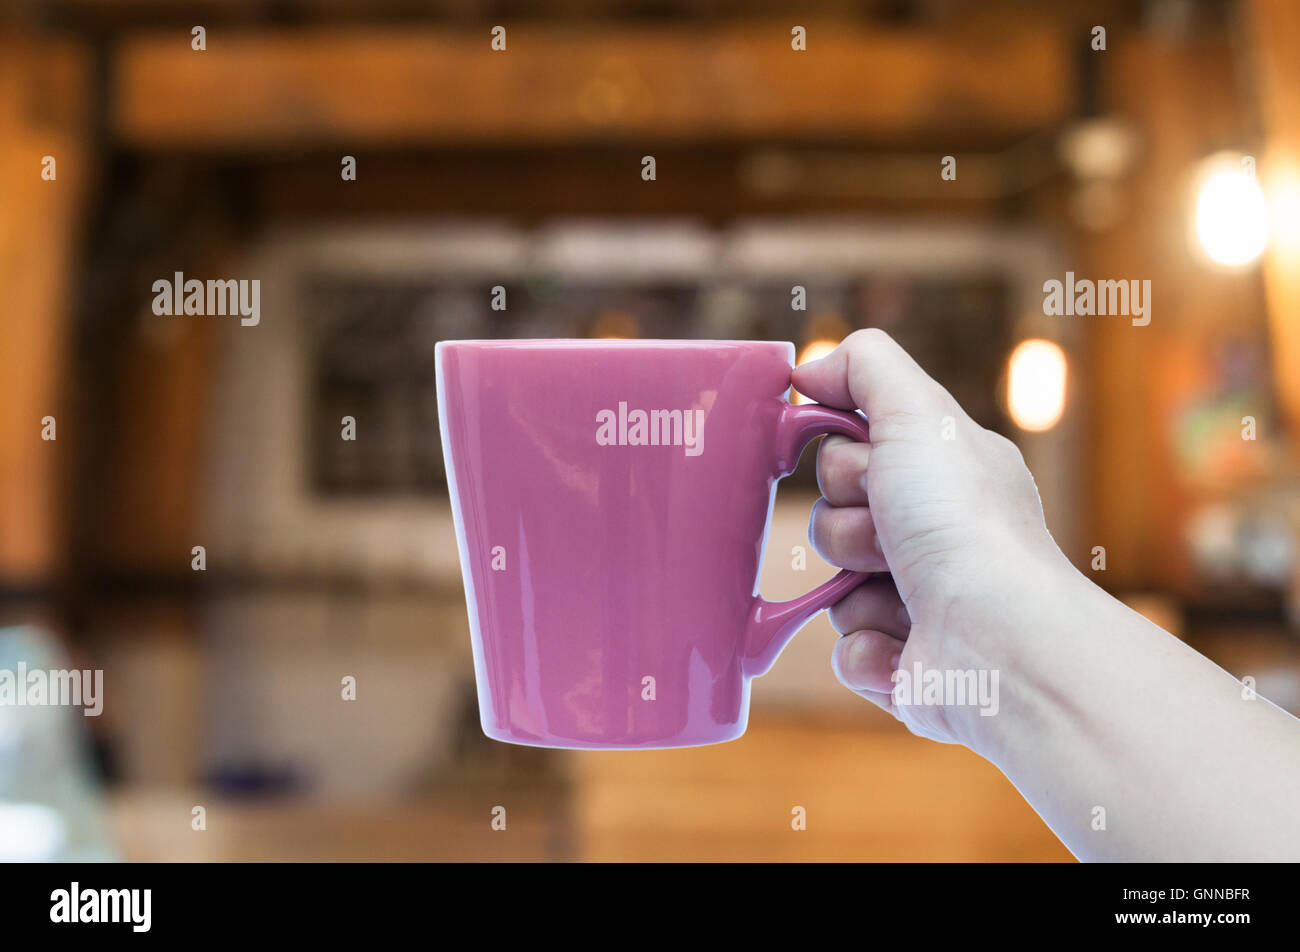 https://c8.alamy.com/comp/GNNBFR/woman-hand-holding-coffee-cup-in-coffee-shop-blurred-abstract-background-GNNBFR.jpg